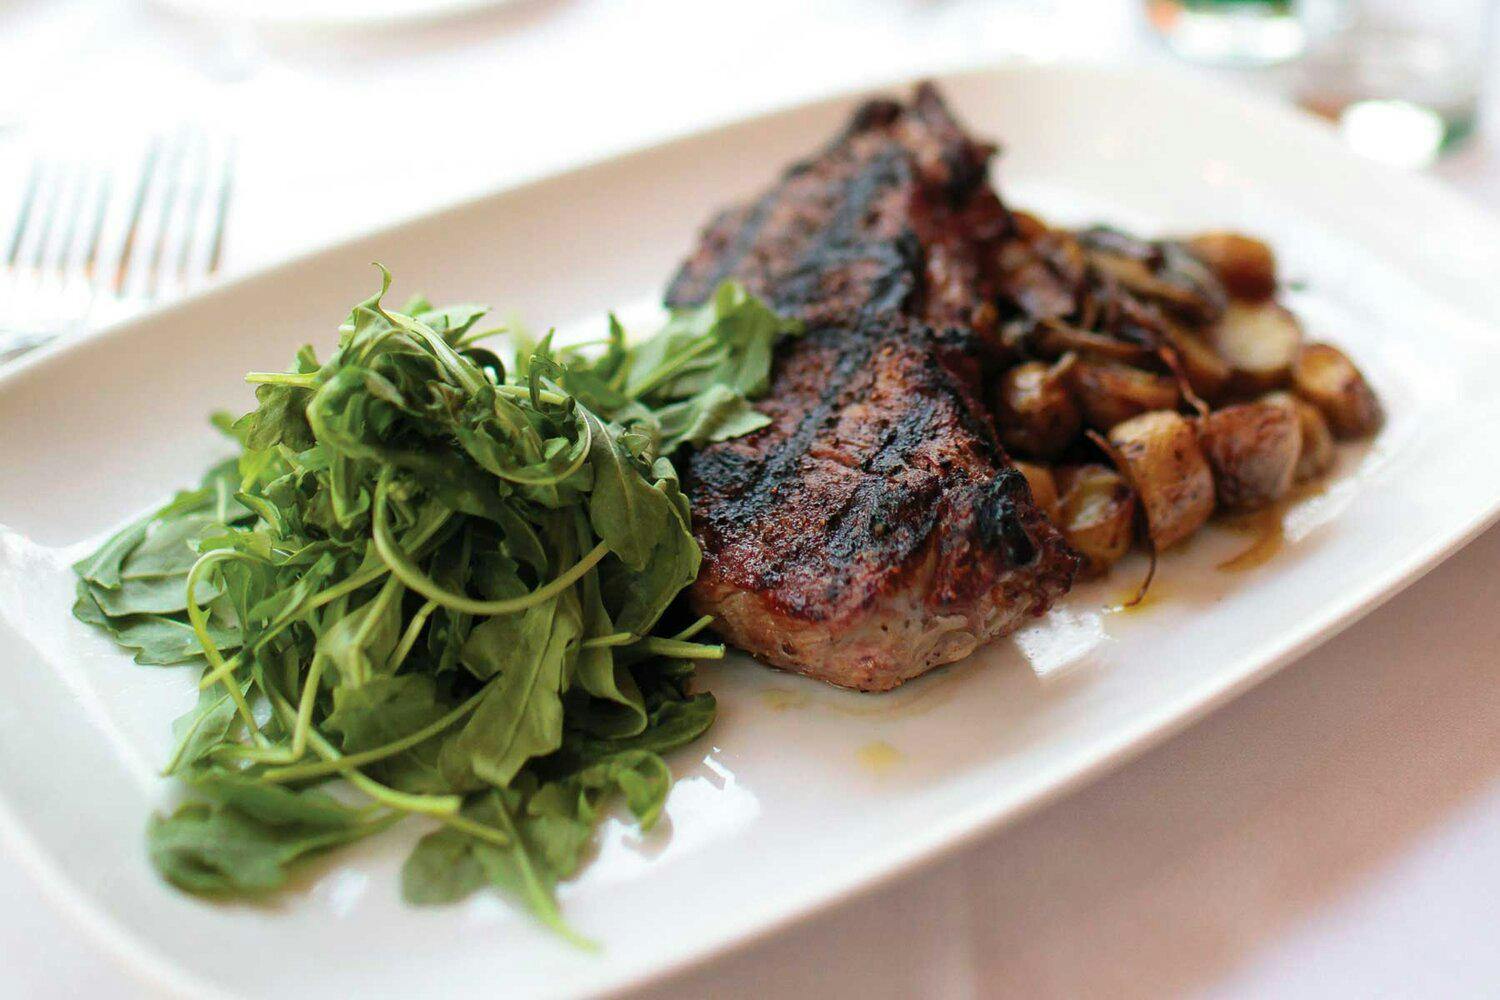 Steak dinner in the Hamptons with a side of greens